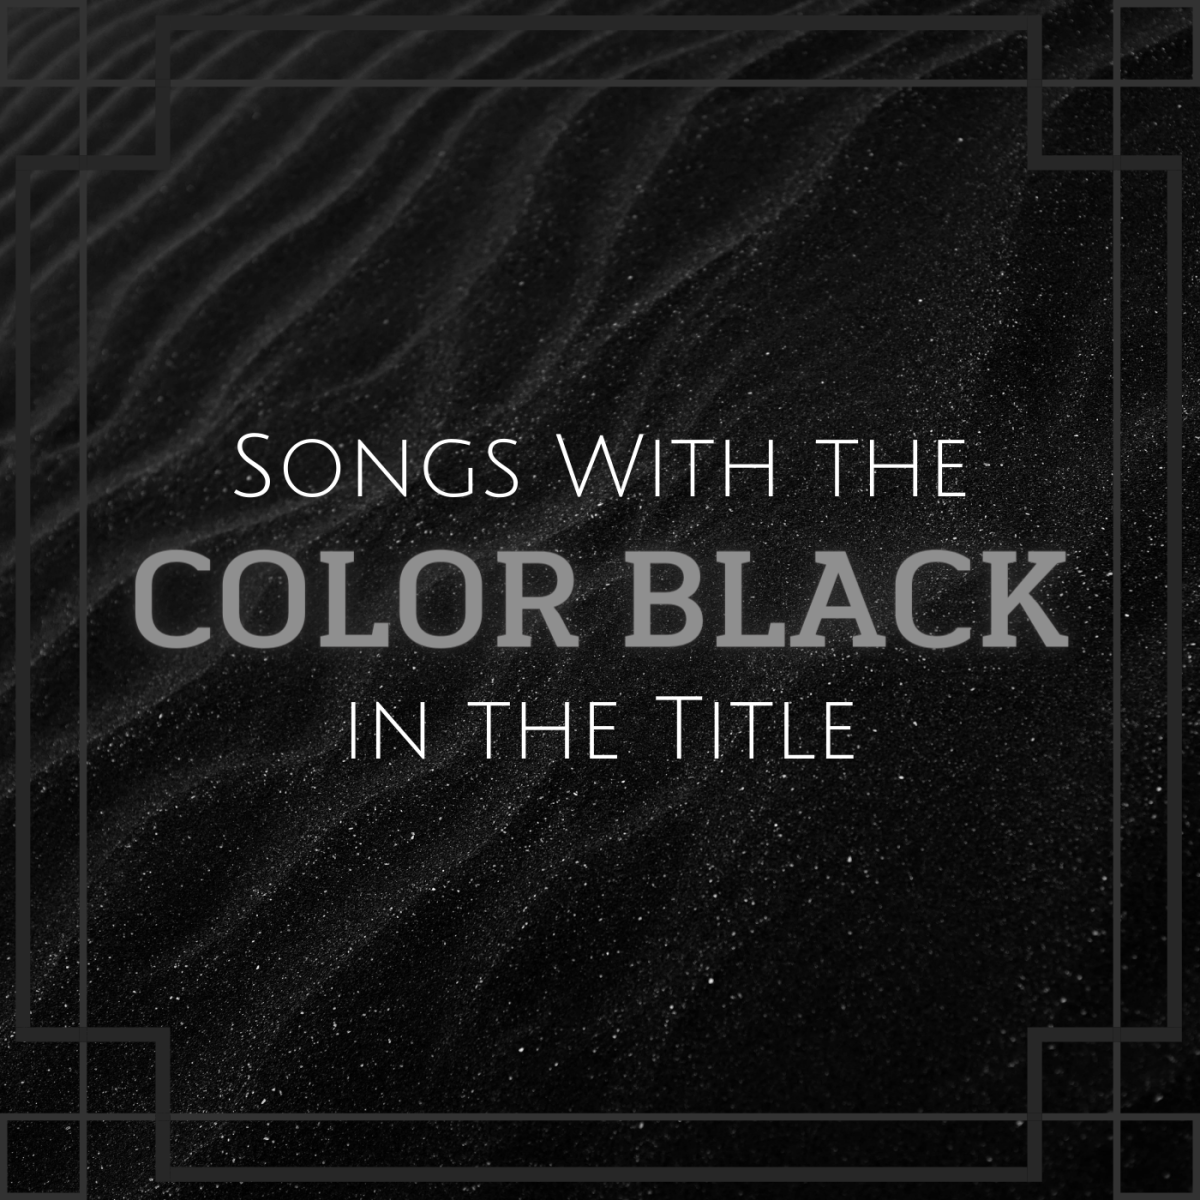 Celebrate the many meanings of the color black with a playlist of pop, rock, country, metal, and folk tunes with black in the title. The color black can signify power, formality, death, evil, and mourning.